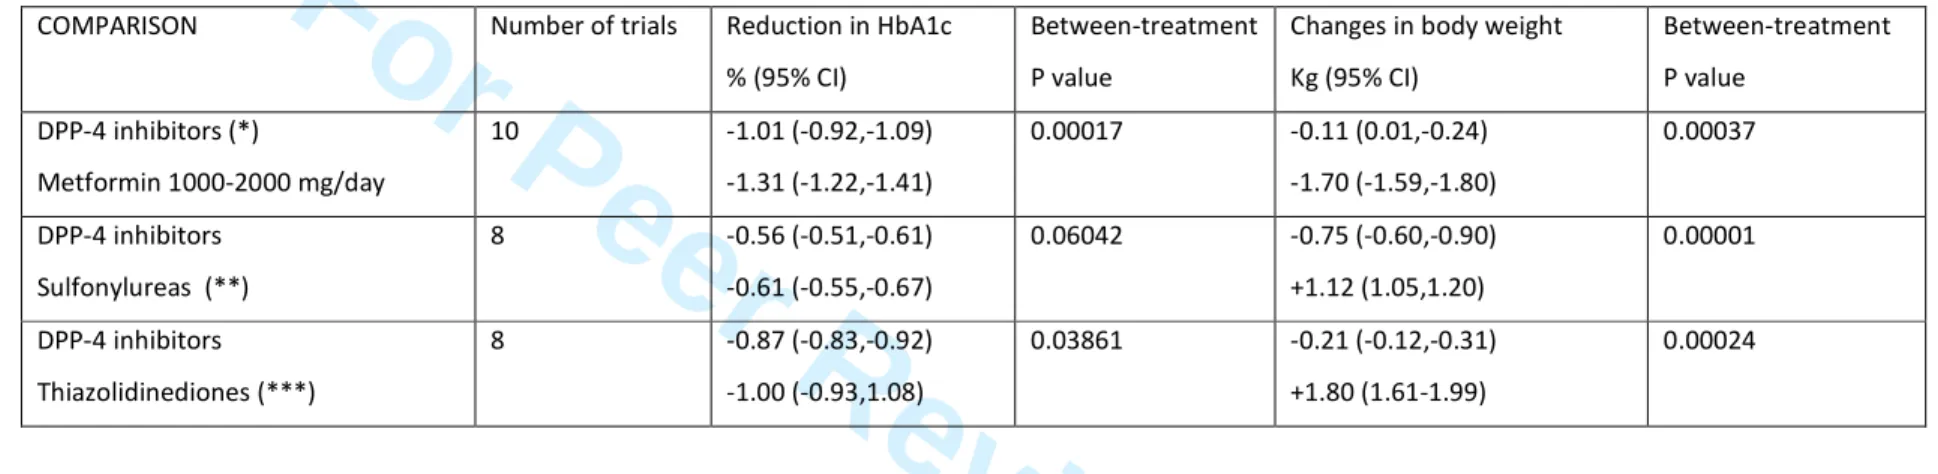 Table 3 : Reductions in HbA1c levels  and changes in body weight with DPP-4 inhibitors versus metformin in drug-naive patients, versus a sulfonylurea in  metformin-treated patients and versus a thiazolidinedione in pooled drug-naive and metformin-treated p